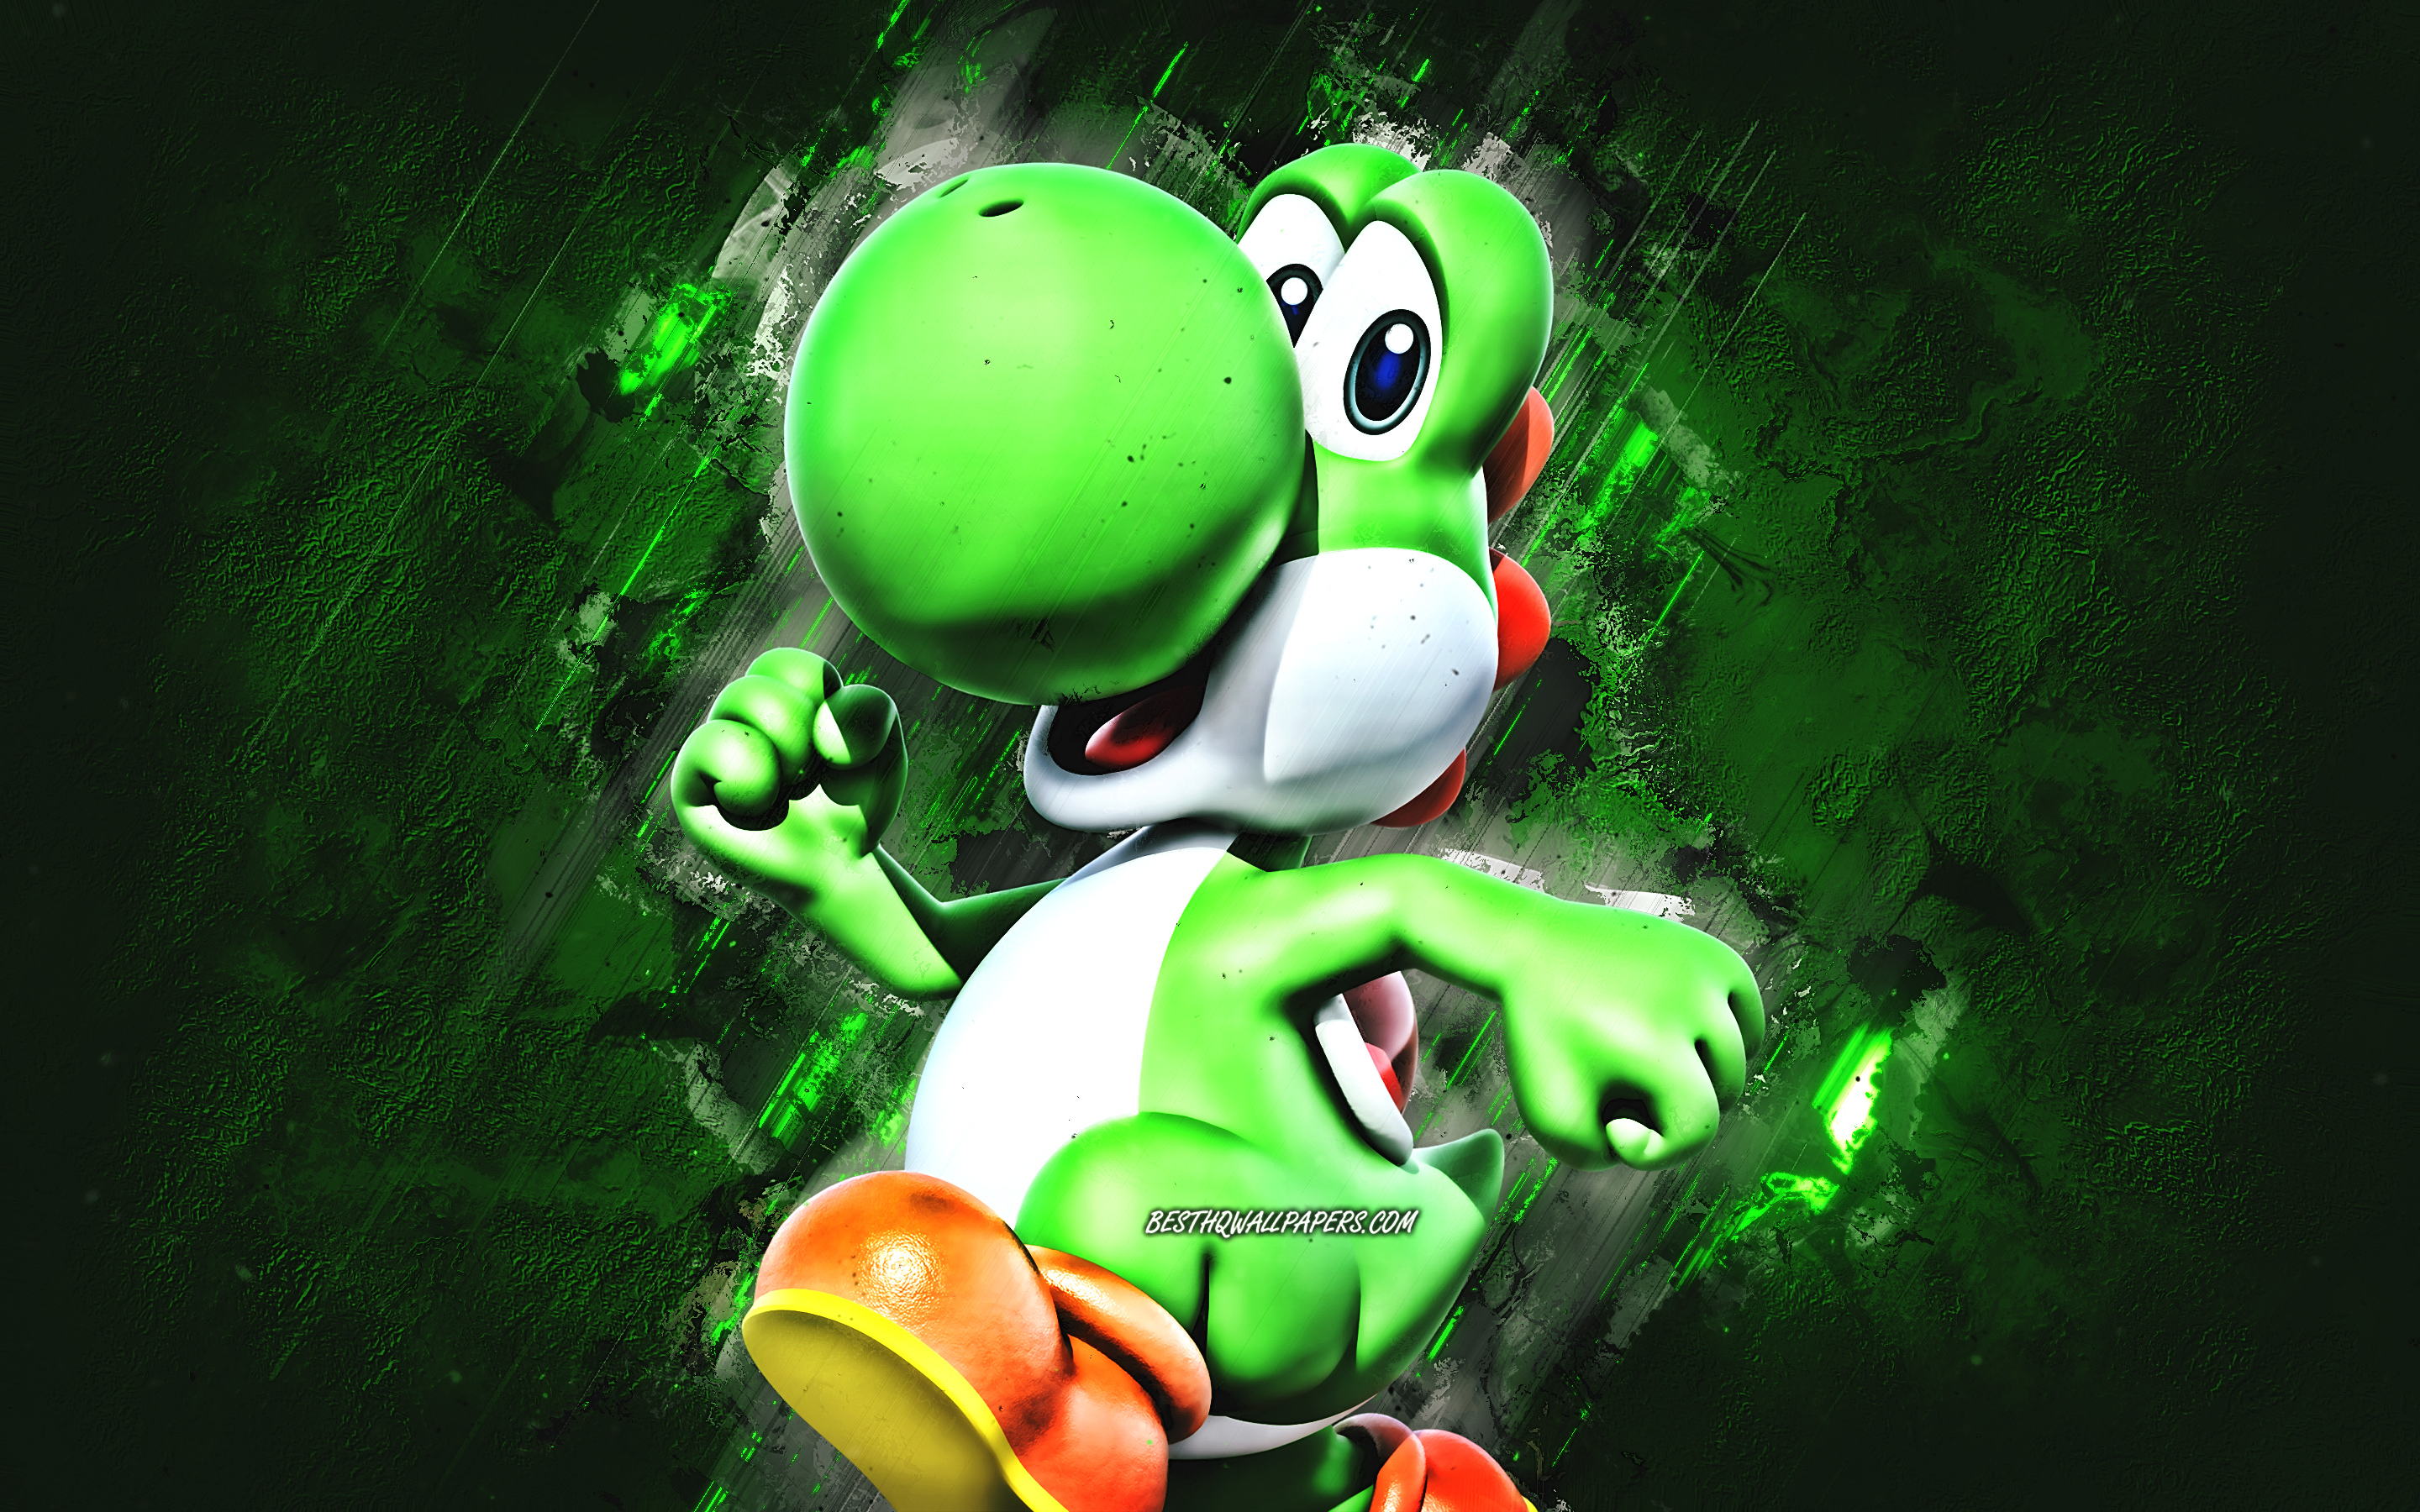 Download wallpaper Yoshi, Super Mario, Mario Party Star Rush, characters, blue stone background, Super Mario main characters, Yoshi Super Mario, green 3D dinosaur for desktop with resolution 2880x1800. High Quality HD picture